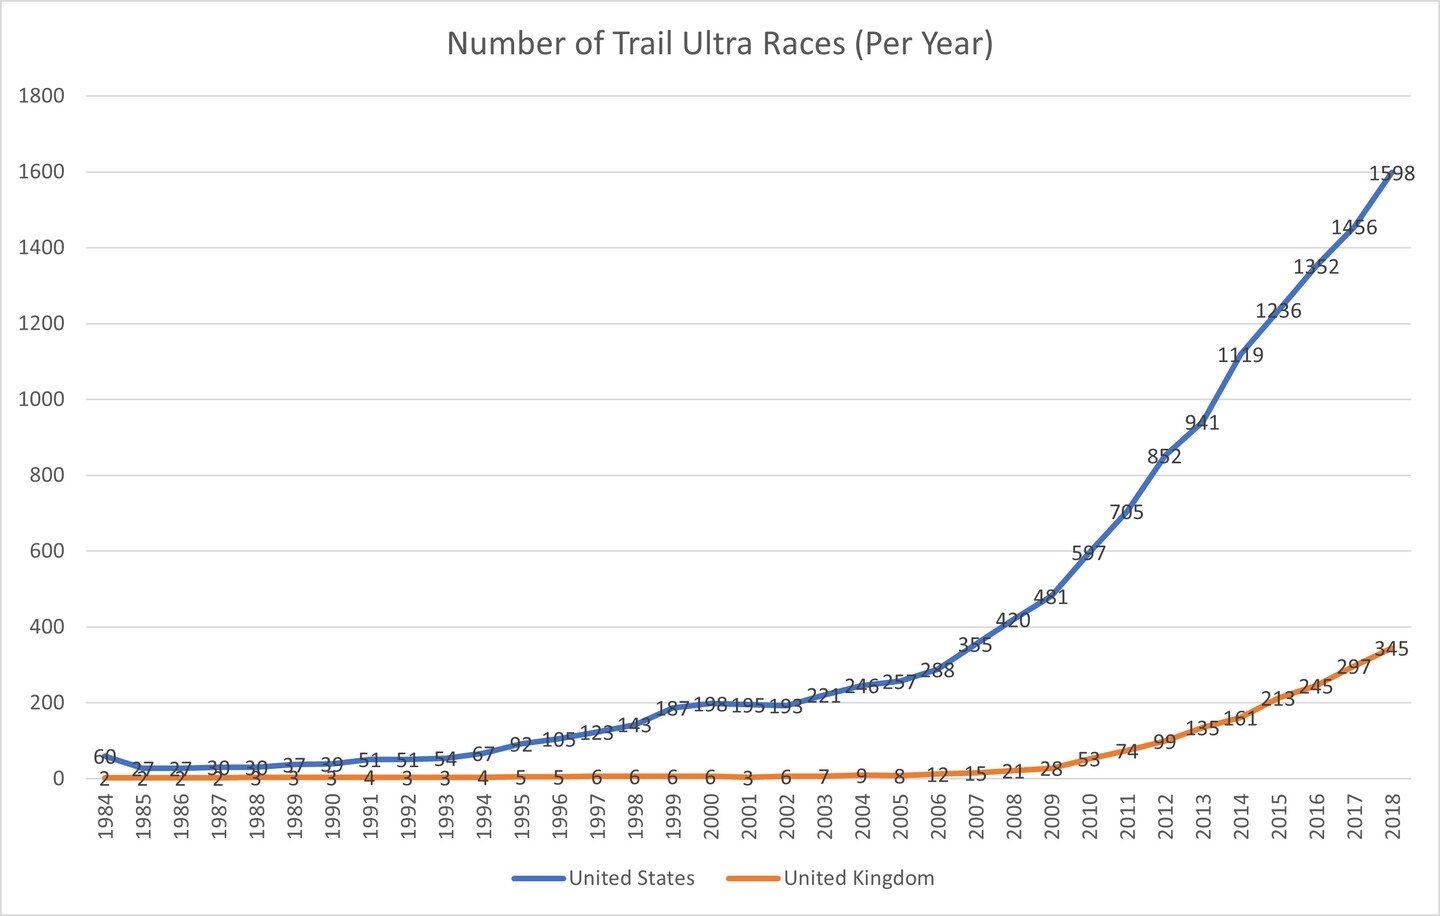 How has trail and ultra running grown in the U.S. and the UK? Take a look at the data below... why do you think there has been such a steep rise in the number of races over the last decade?

If you want to help contribute to the project, please visit